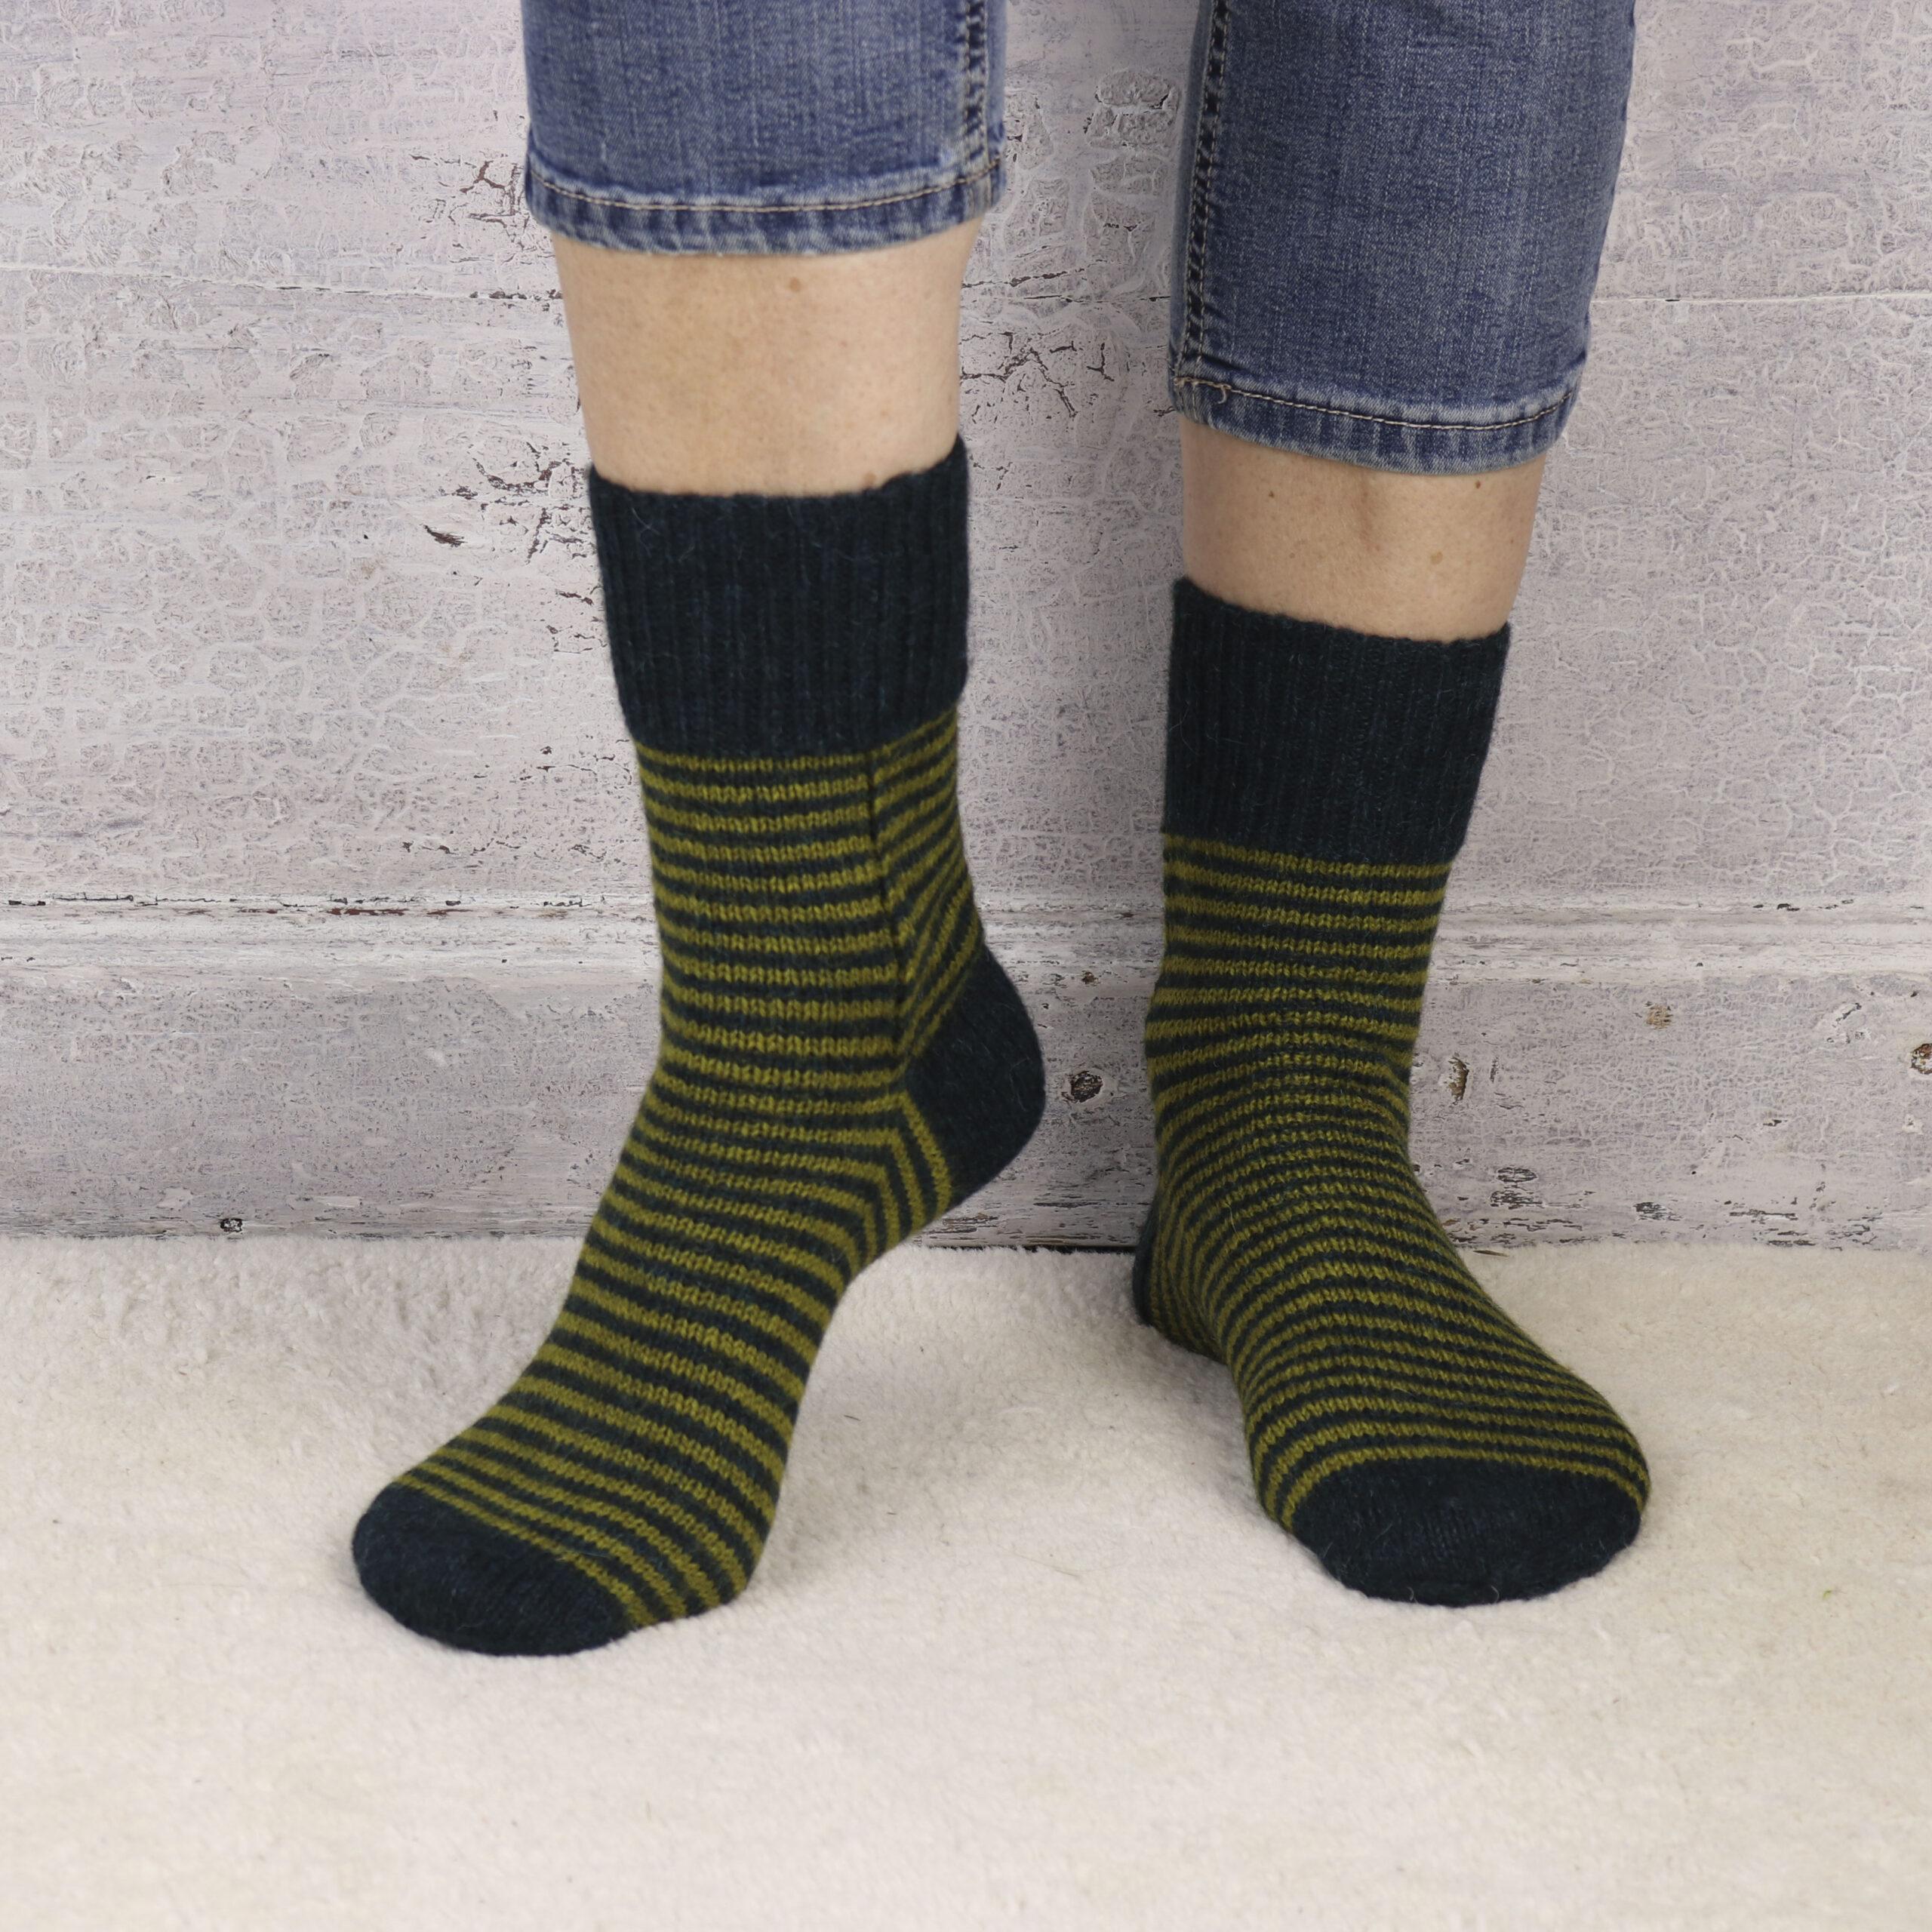 One Sock Deluxe by Kate Atherley in The Fibre Co. Amble